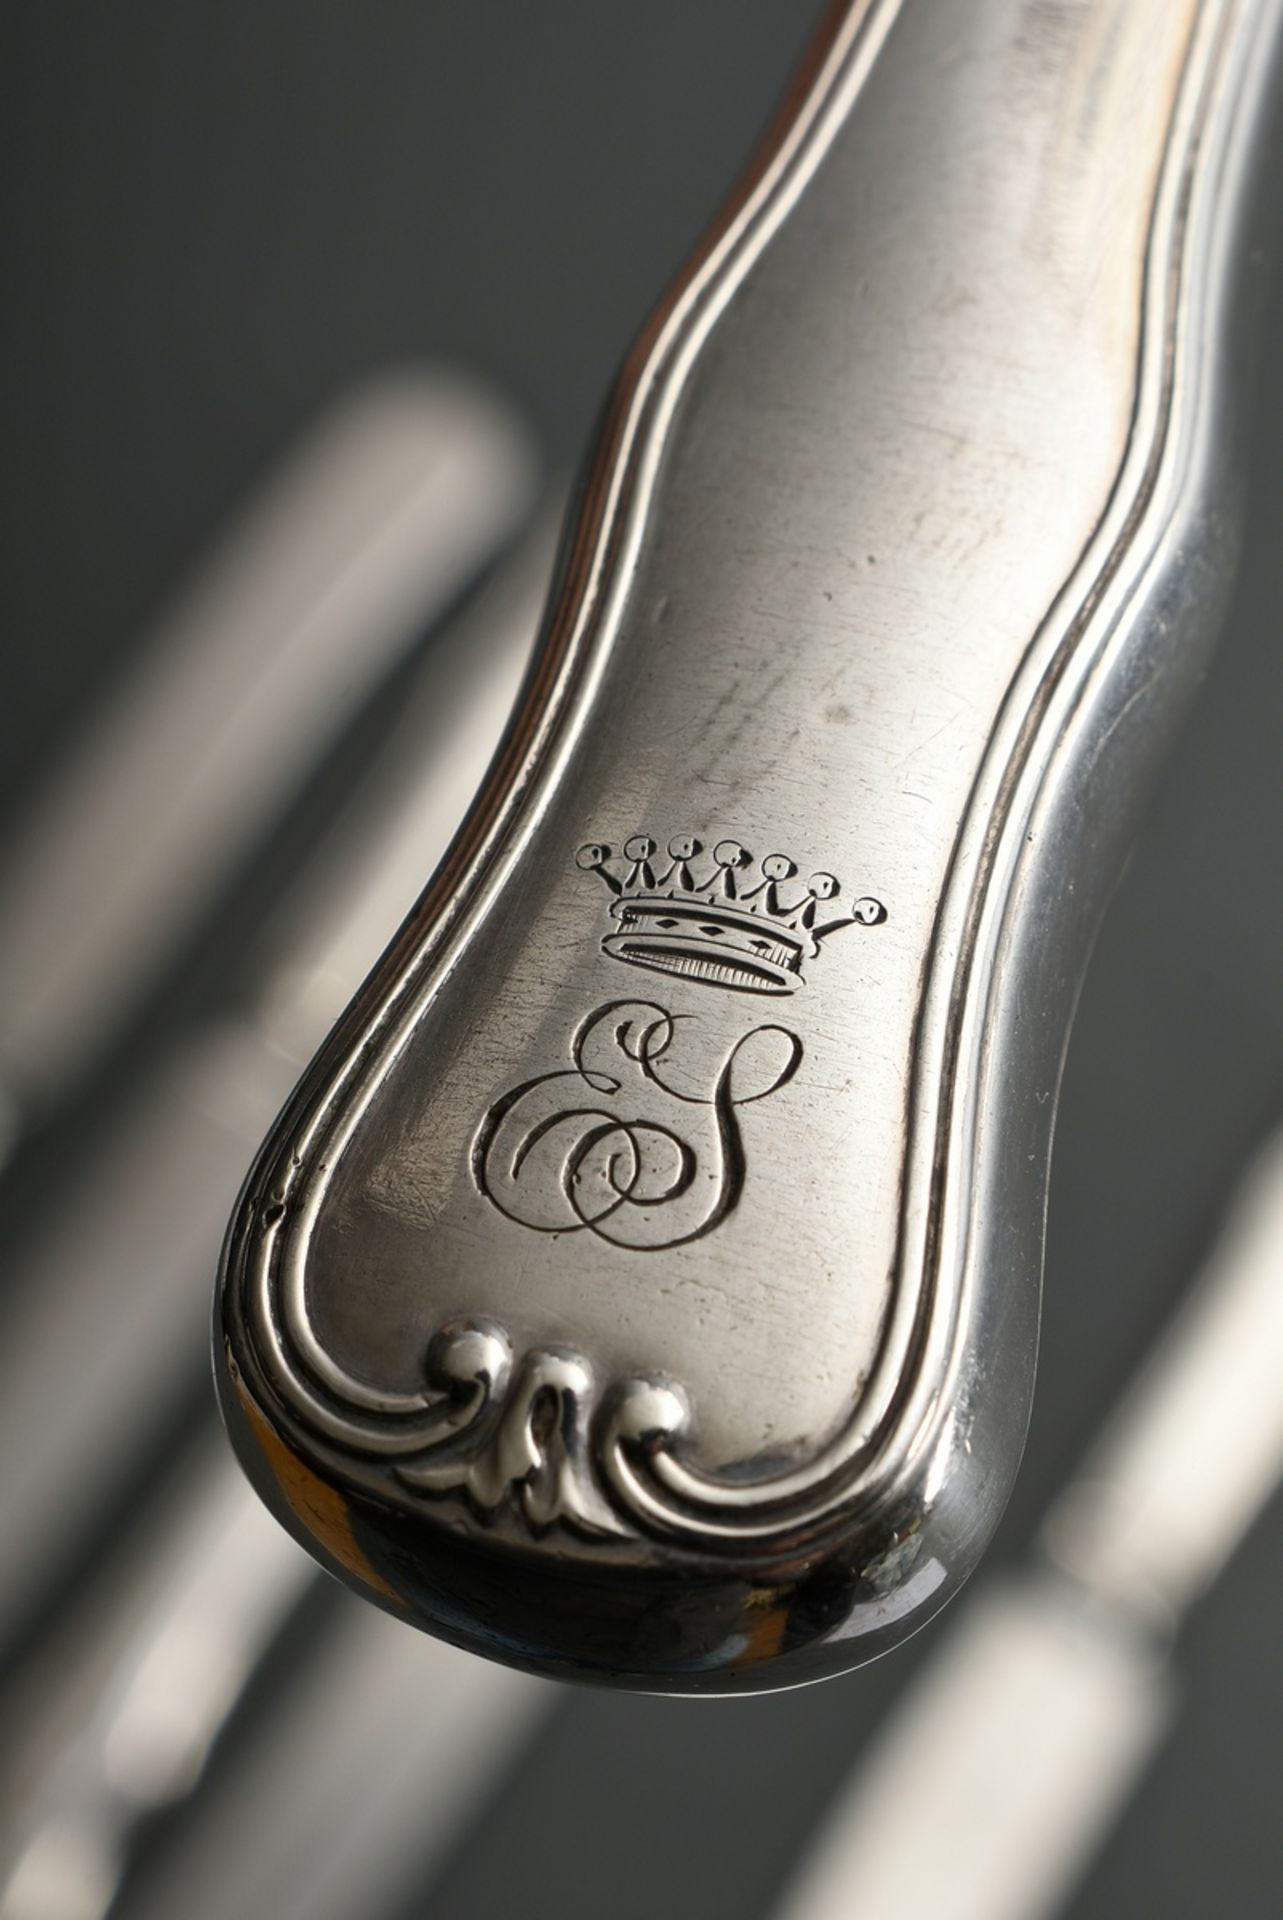 6 large knives with applied coat of arms ‘Rose under winged helmet’ and monogram ‘EJ’ under crown,  - Image 4 of 6